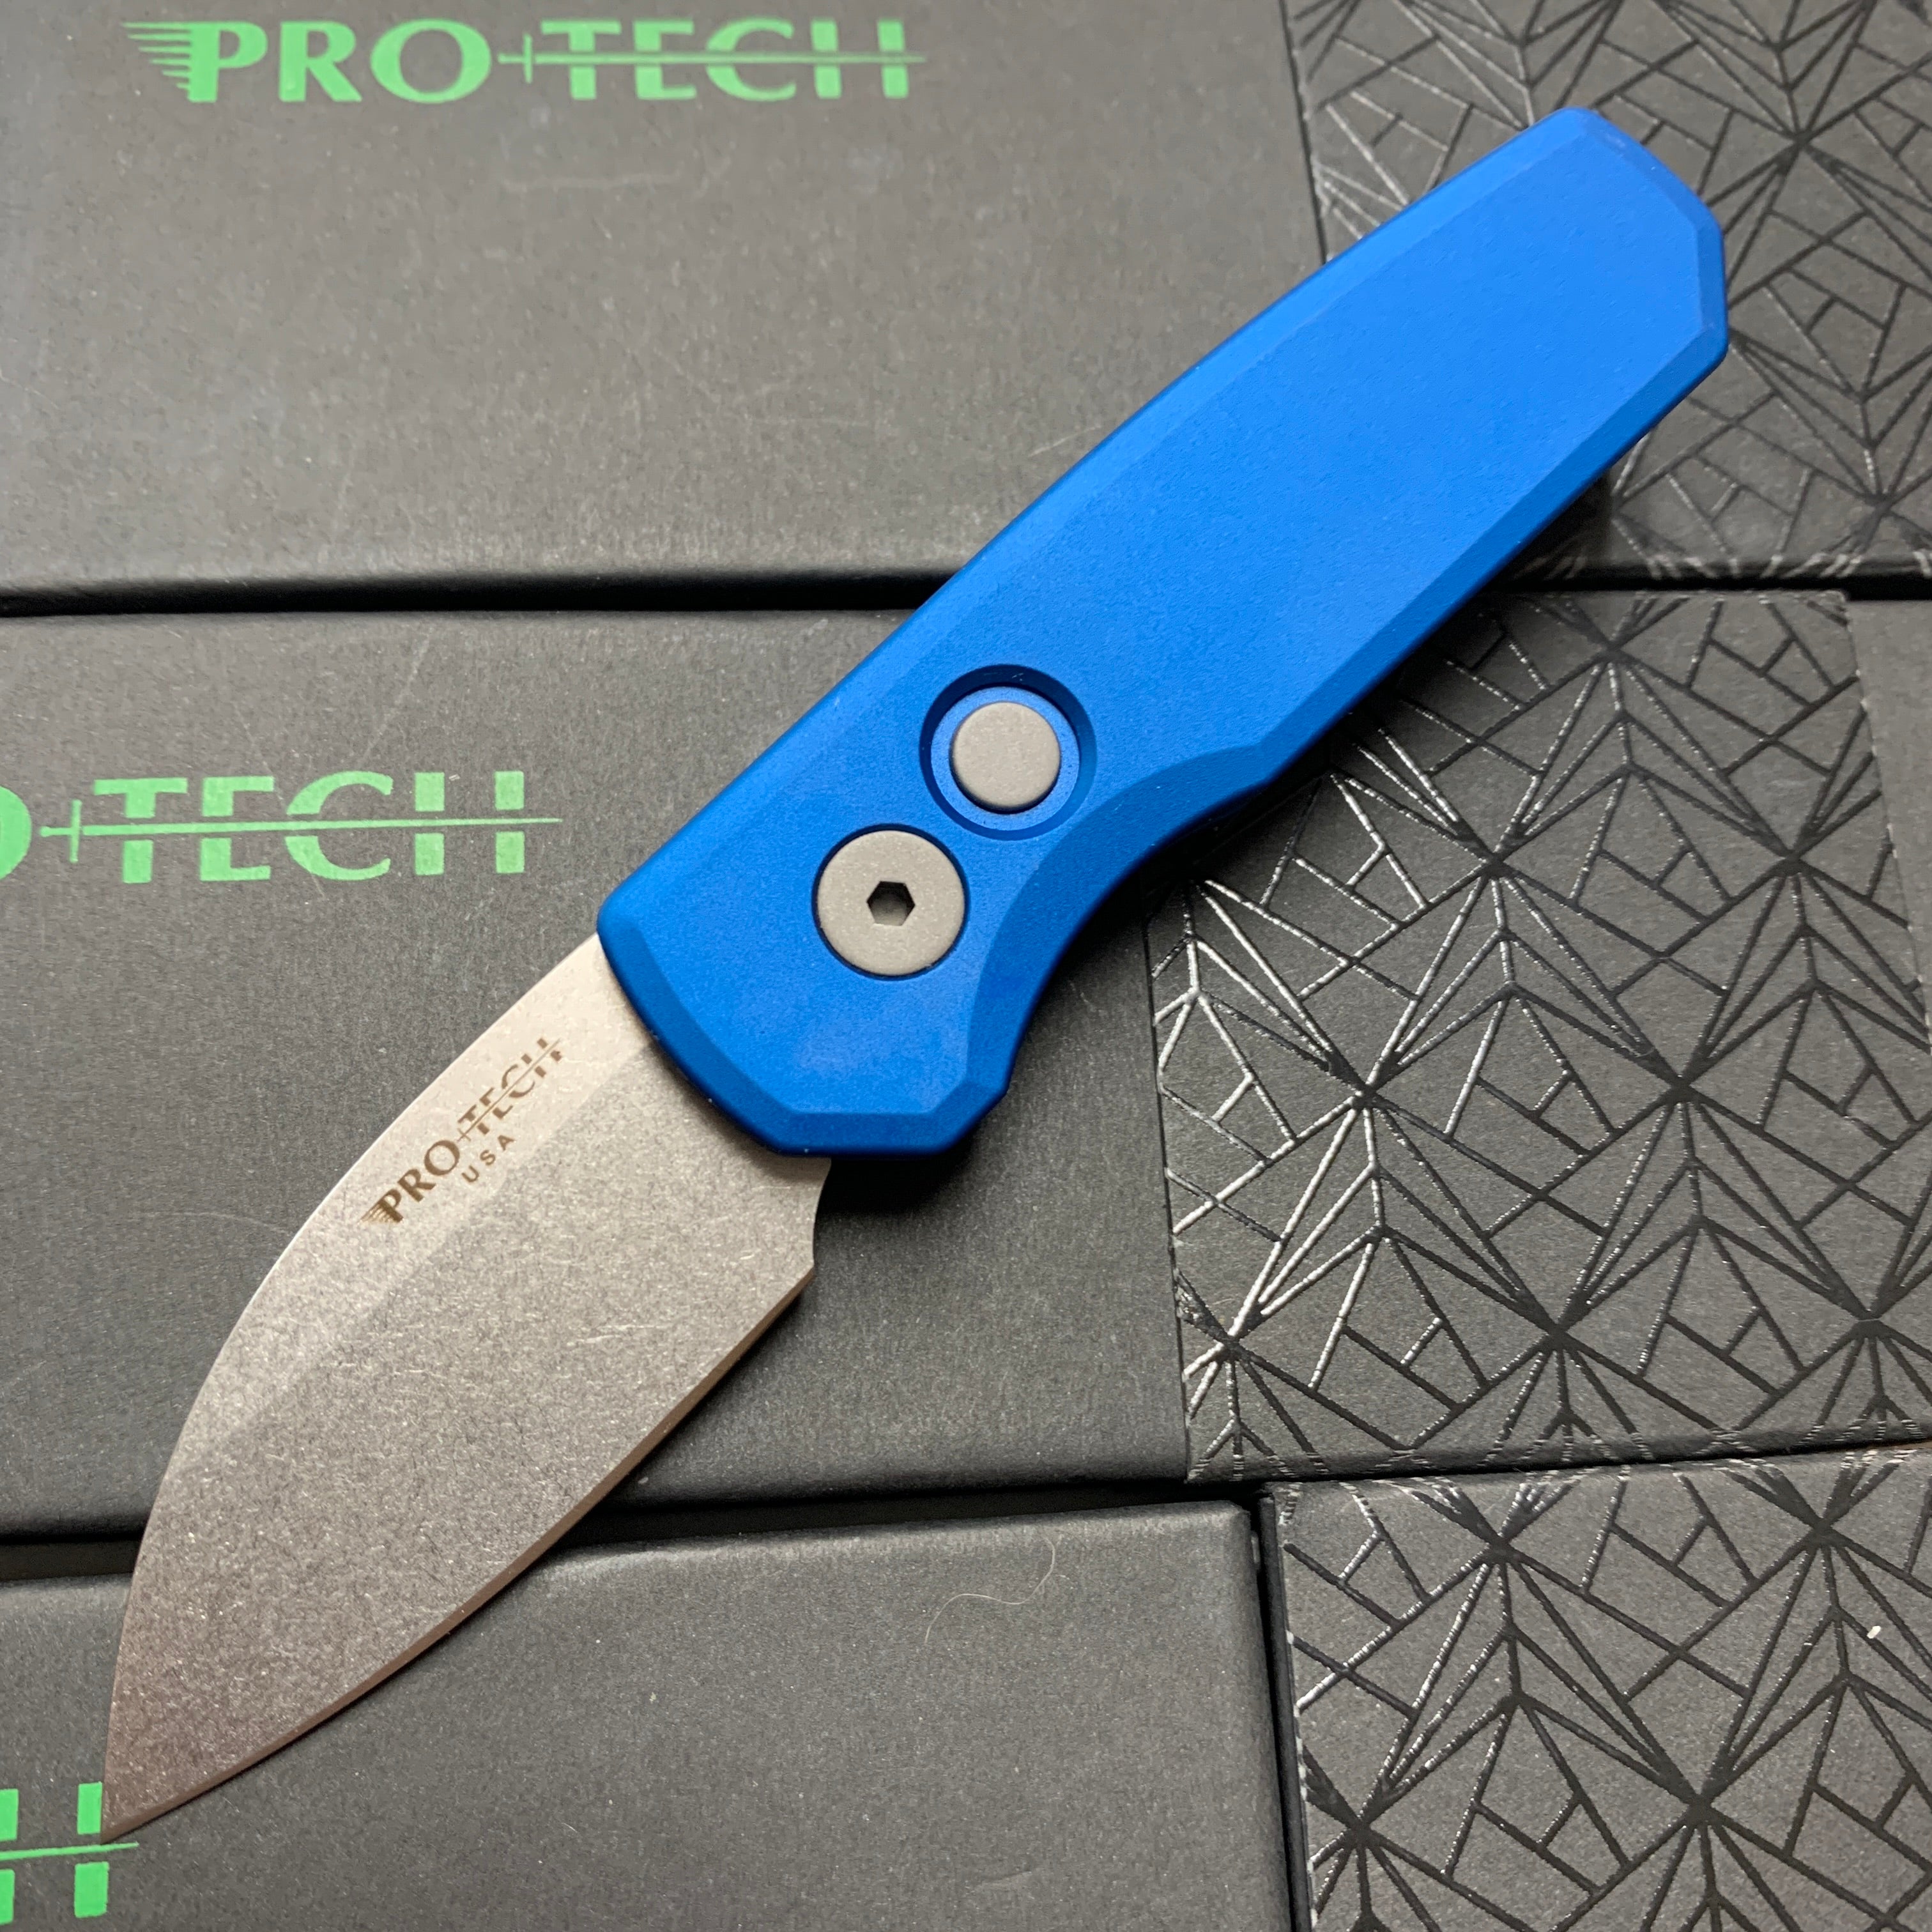 Pro-Tech Runt 5 Wharncliffe Automatic Knife Blue (1.9" Stonewash) R5101-Blue #Pro-TechRunt5R5101-Blue #Pro-TechRunt5